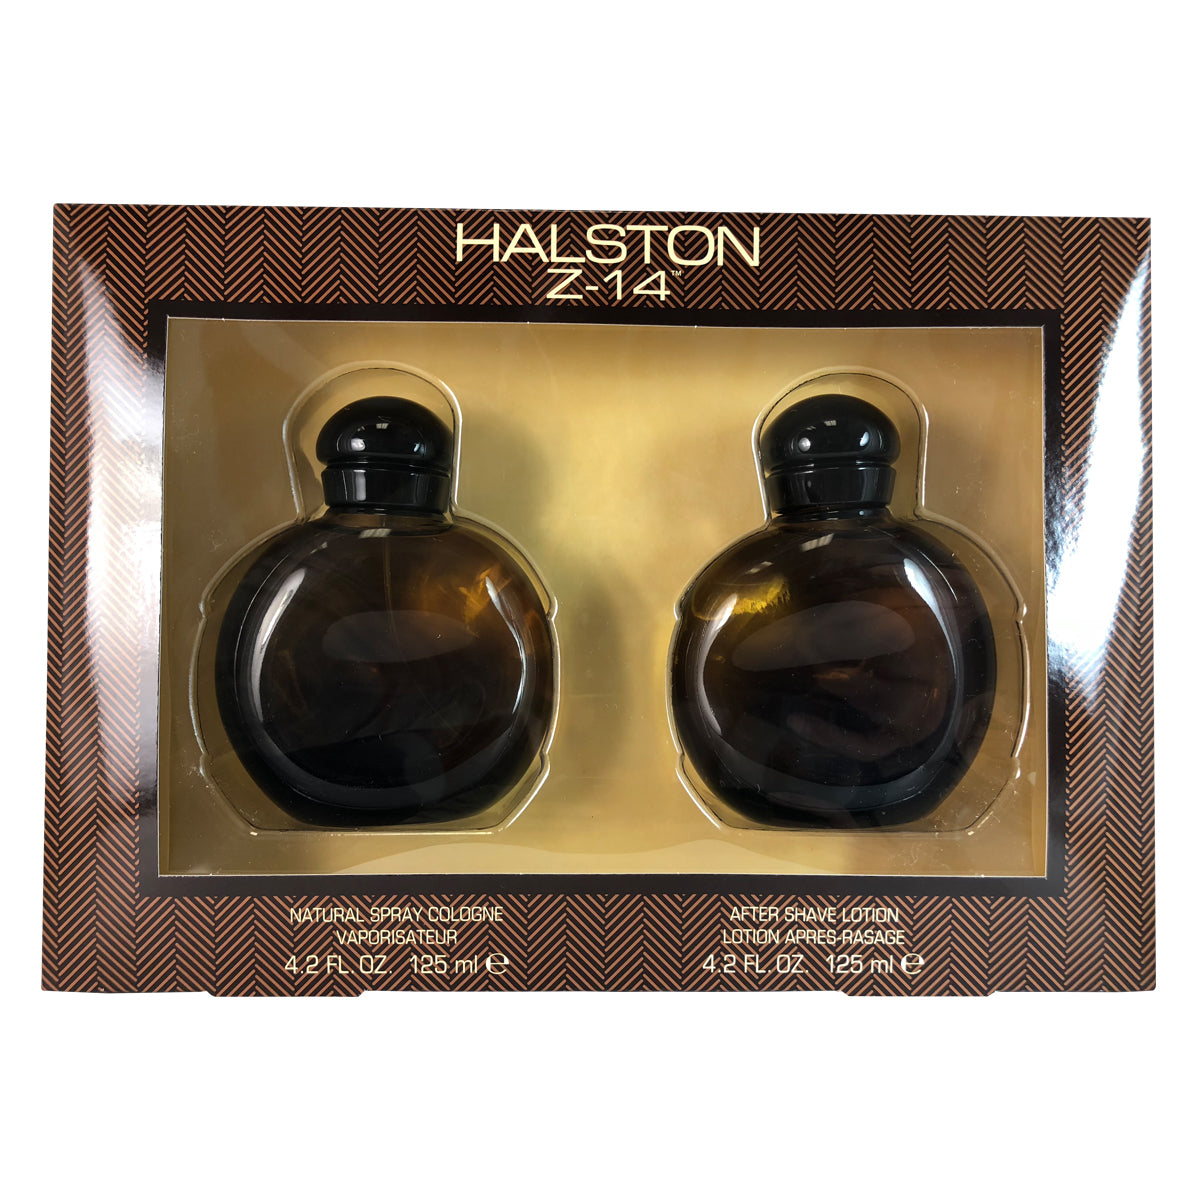 Halston Z-14 for Men by Halston 2 Piece Gift Set with 4.2 Cologne + After Shave